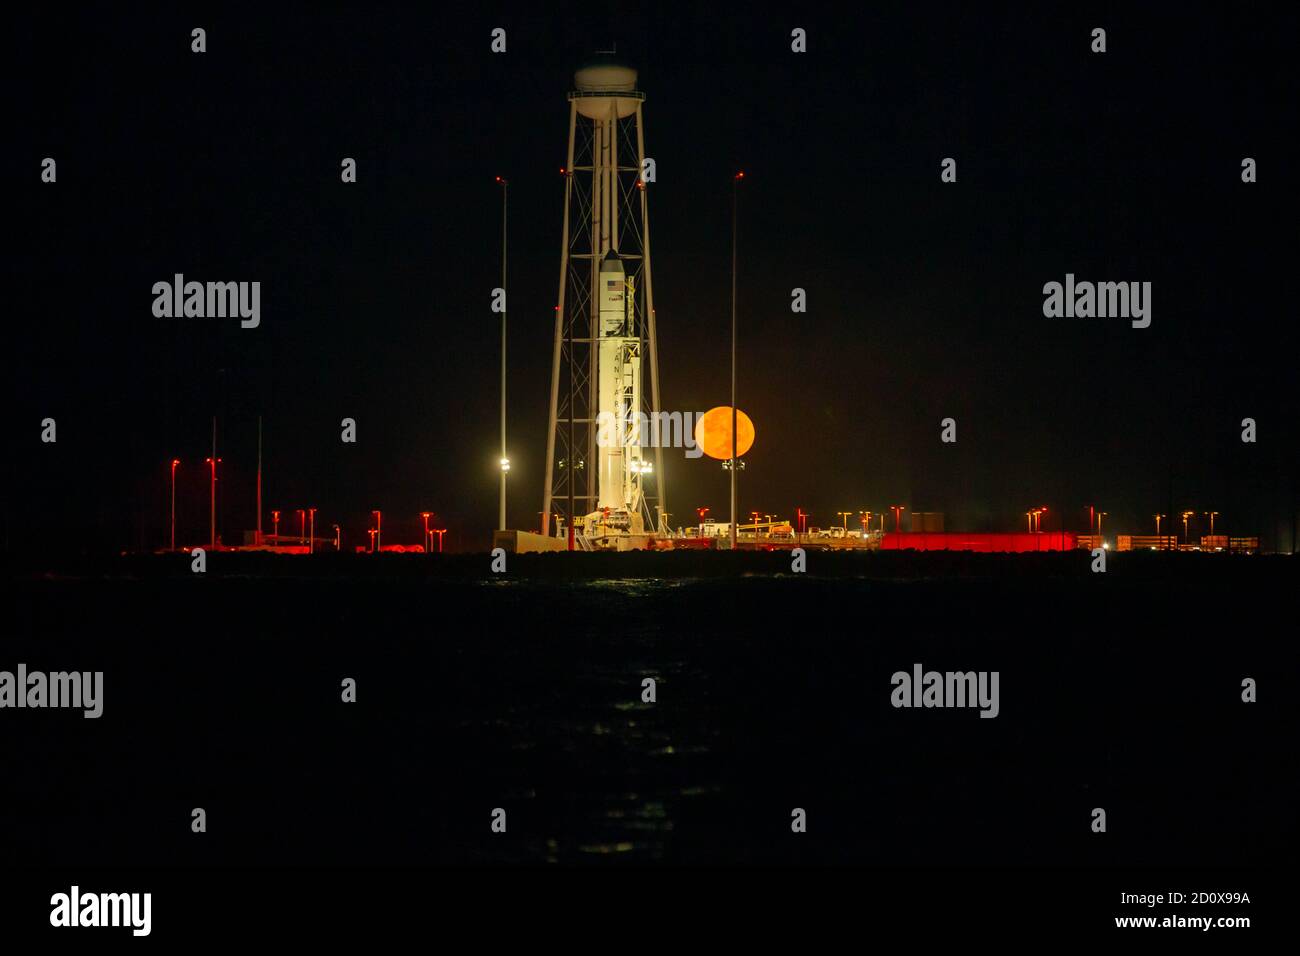 The Northrop Grumman Antares rocket, with Cygnus resupply spacecraft onboard, is ready for launch as the harvest moon rises behind at the Mid-Atlantic Regional Spaceport in the NASA Wallops Flight Facility October 1, 2020 in Wallops, Virginia. The commercial cargo resupply mission is carrying 8,000 pounds of supplies and equipment to the International Space Station. Stock Photo